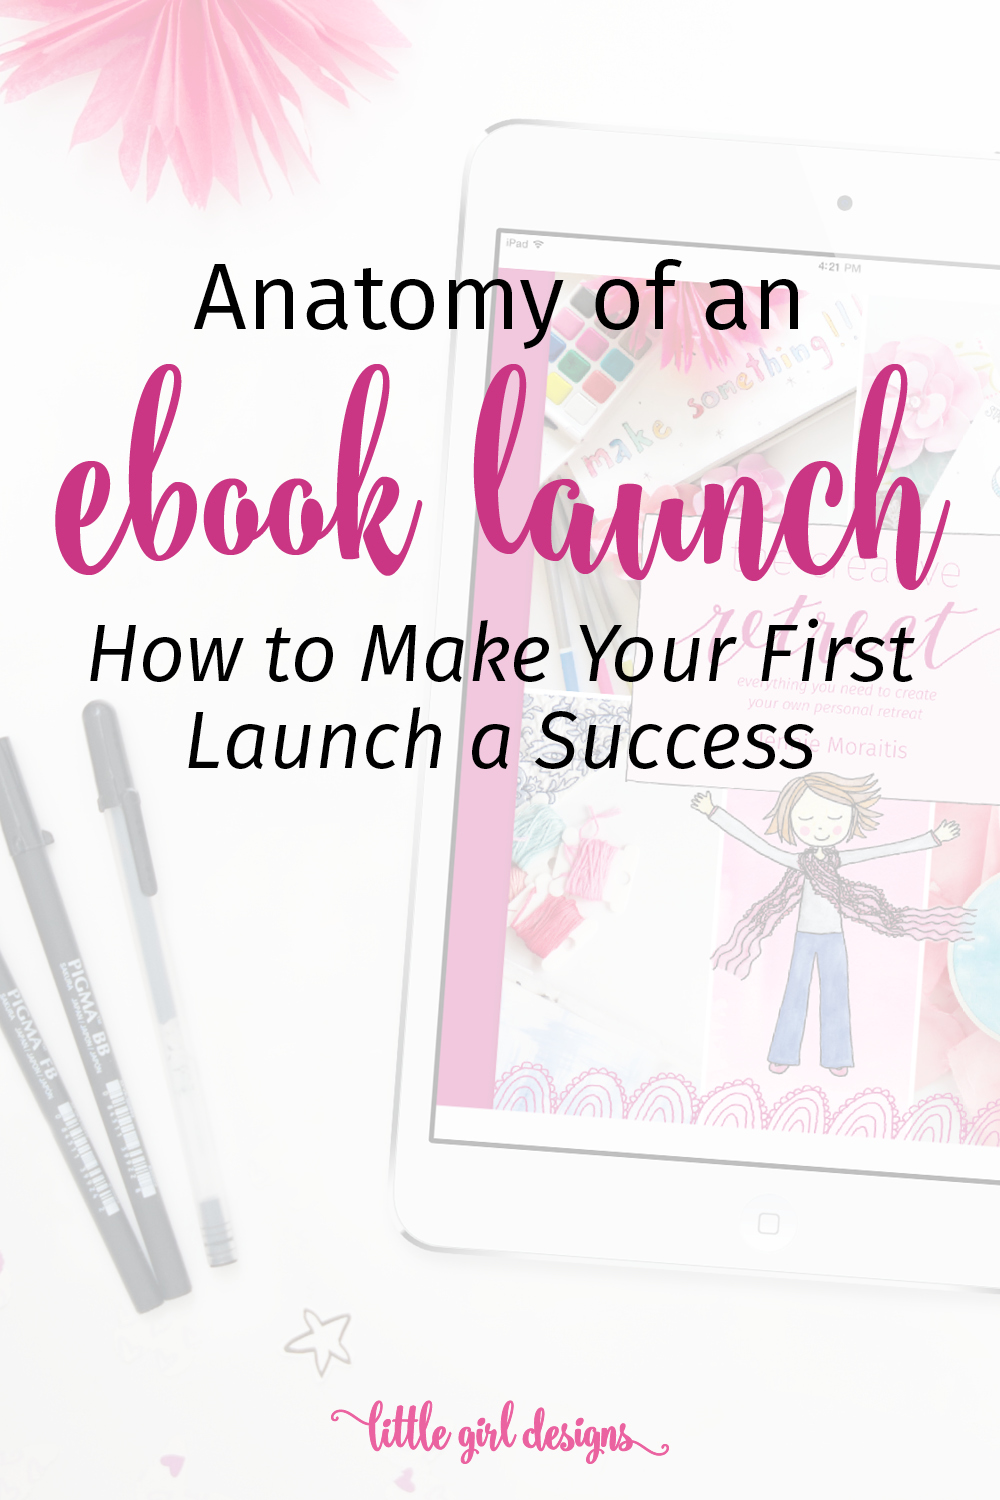 Have you ever wondered what the steps are to create and launch an eBook? I share what I did to write and publish my first ebook as well as the actual spreadsheet I used to track everything.